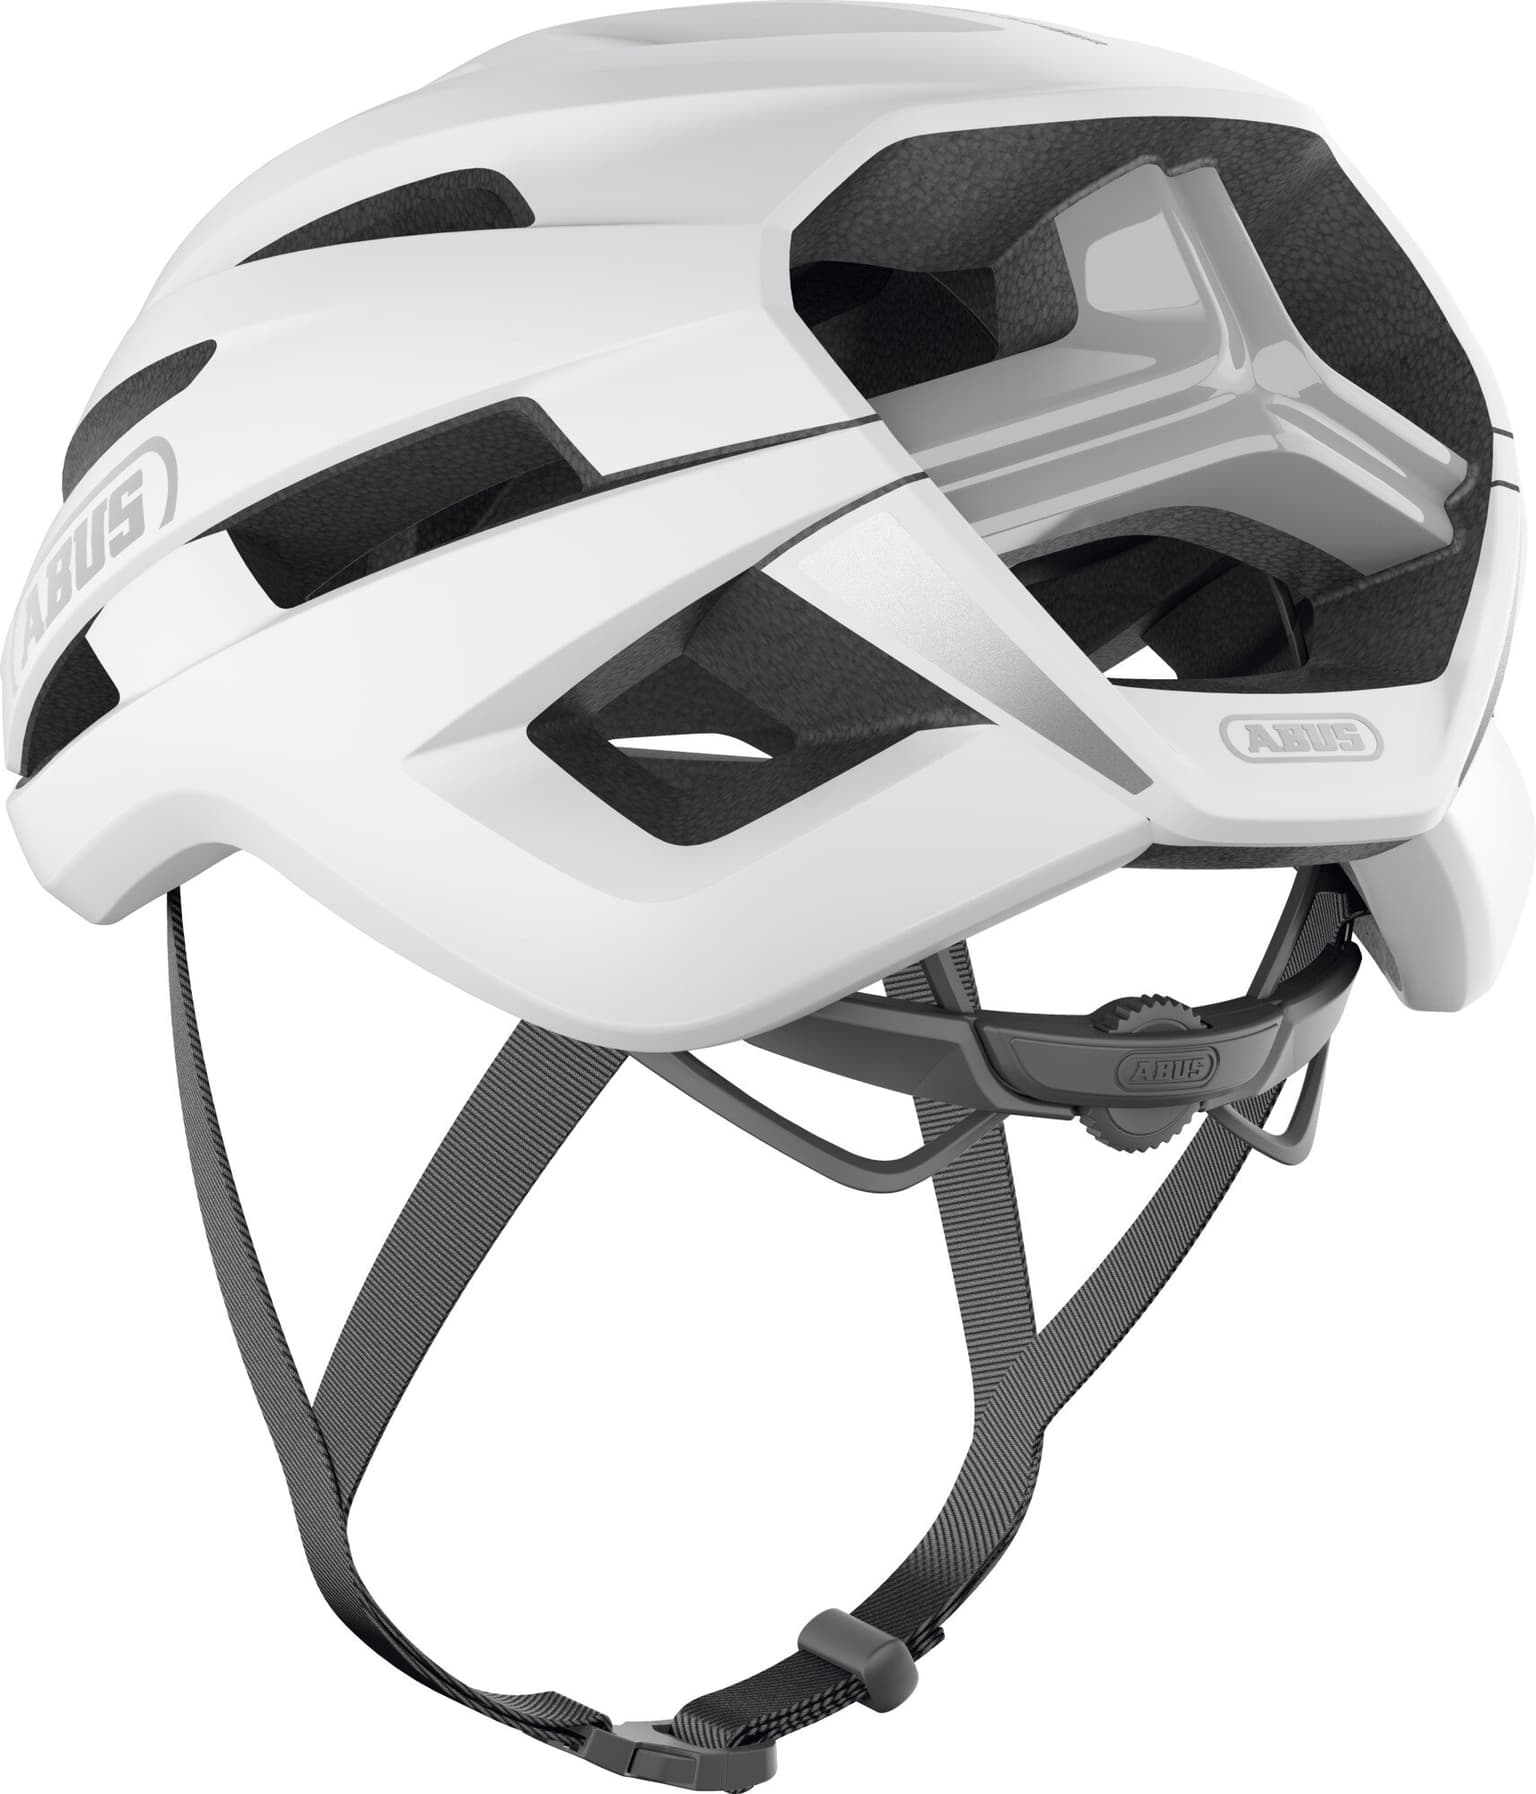 Abus Abus StormChaser ACE Velohelm weiss 2